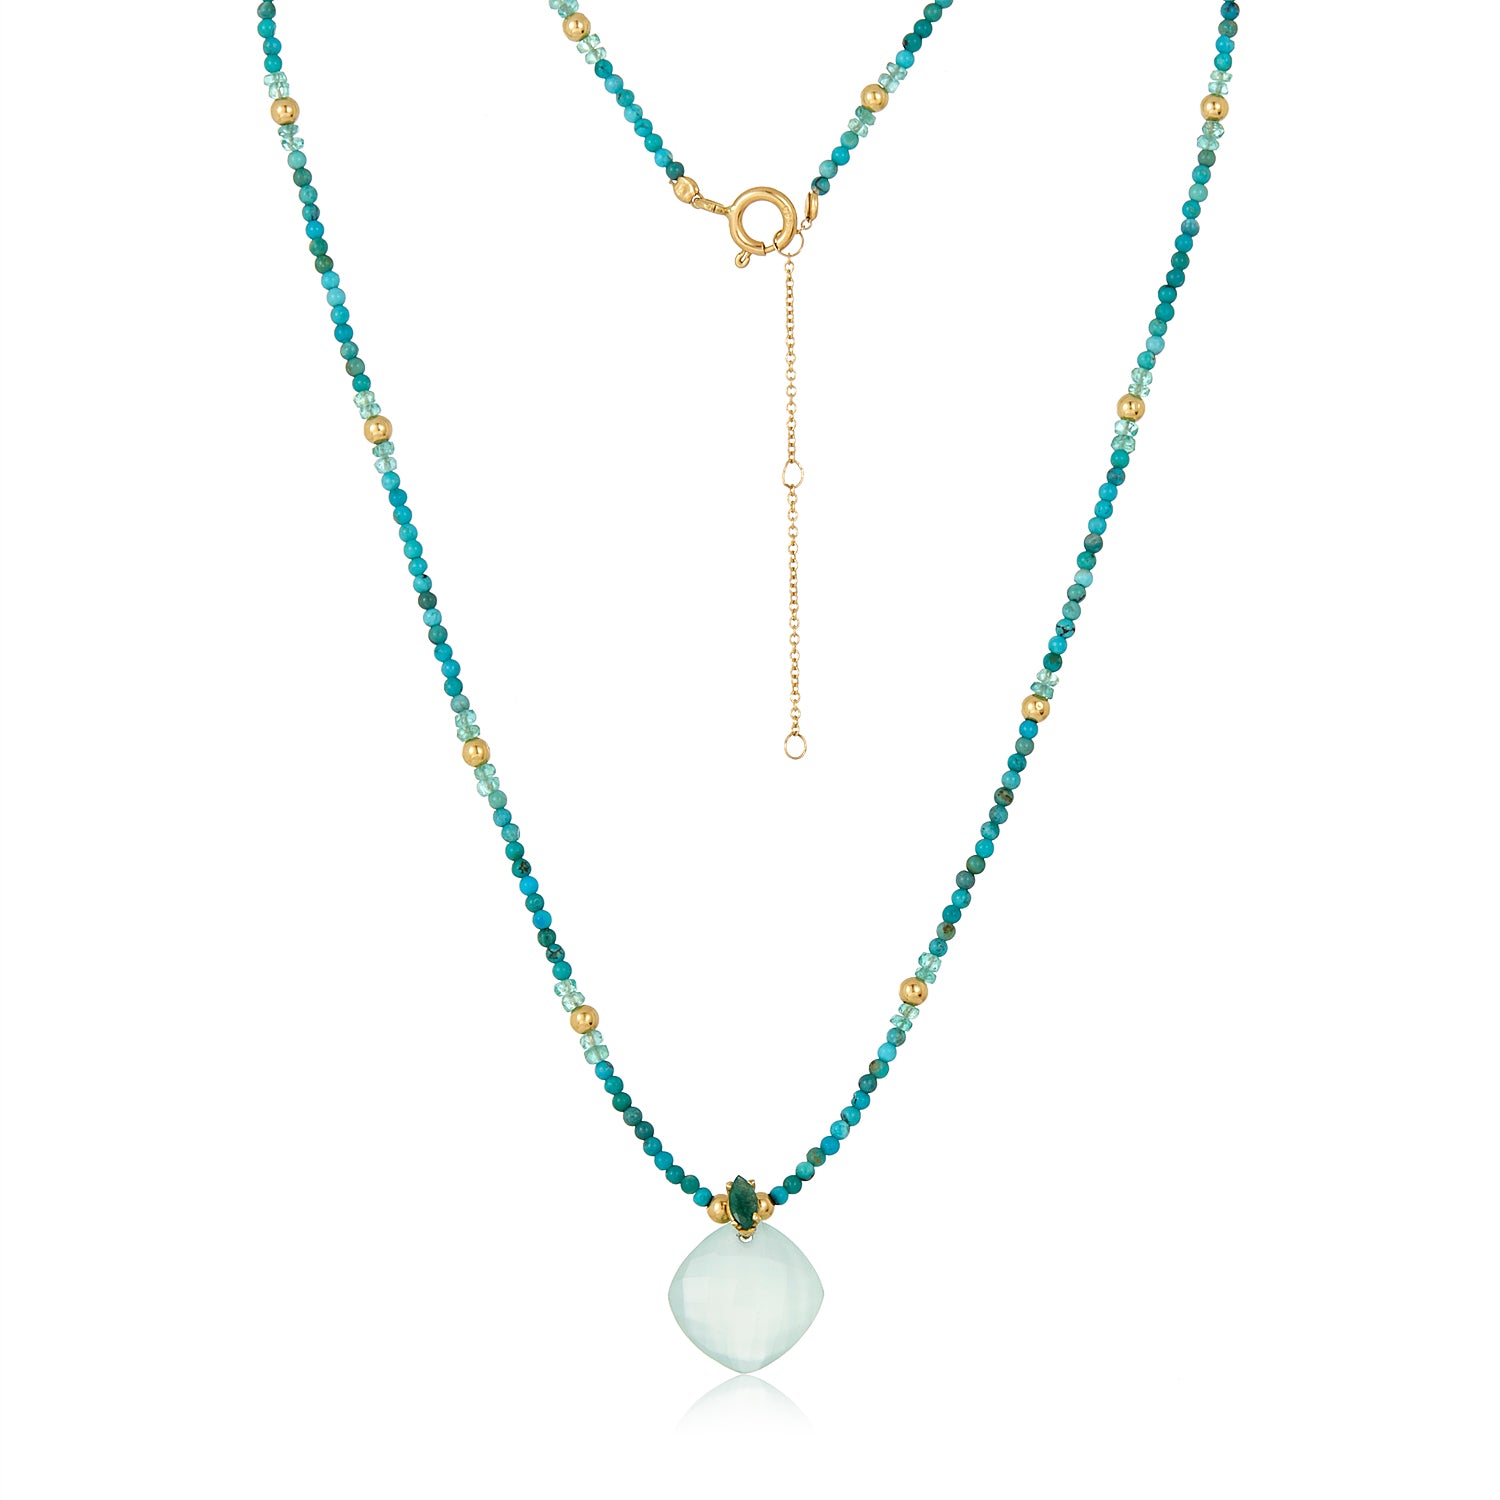 Turquoise Beads Chalcedony Necklace in 14k